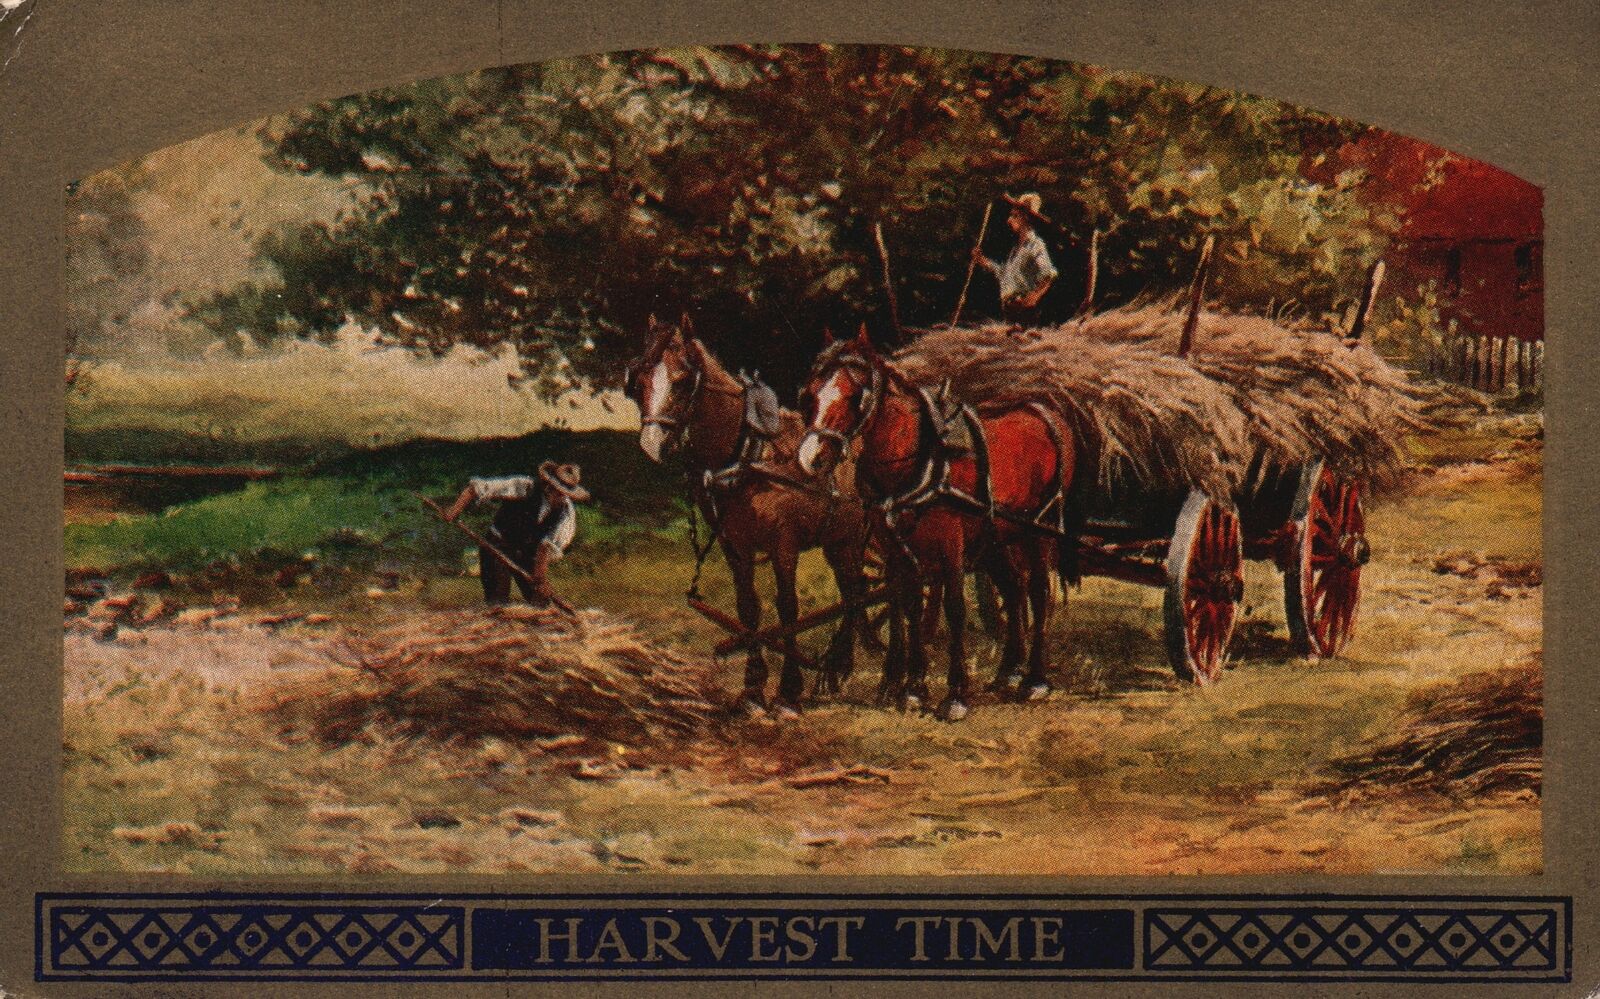 Vintage Postcard 1910's Harvest Time Farming Hay Carried By Horses